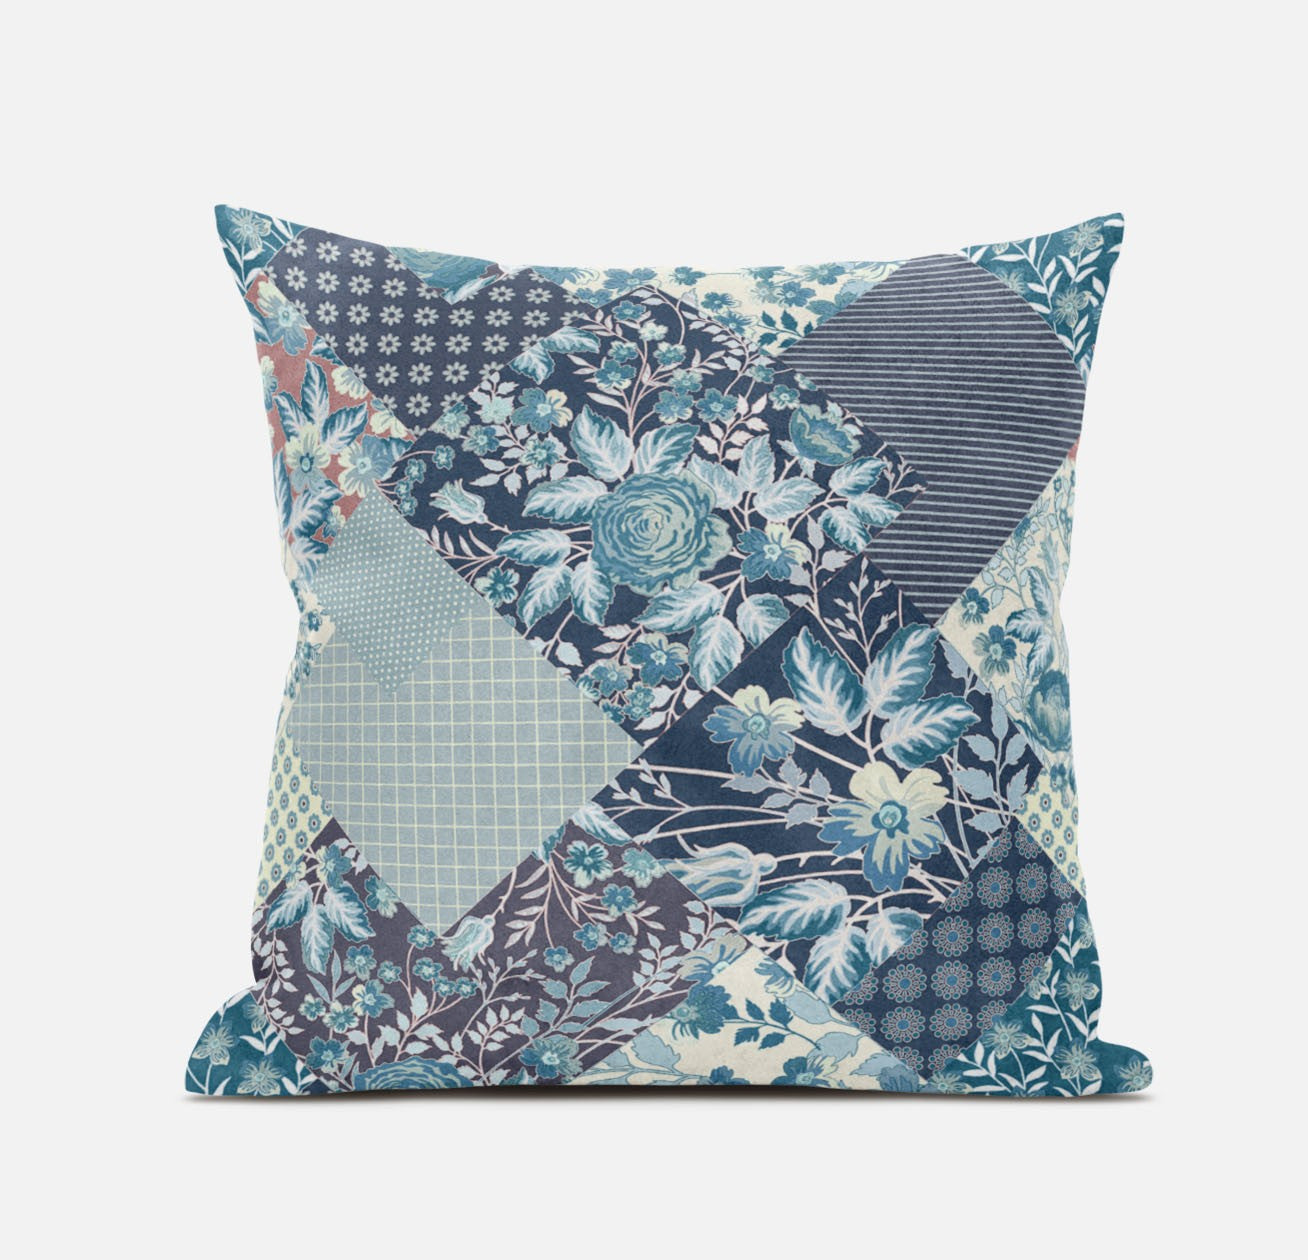 16" Blue White Floral Suede Throw Pillow